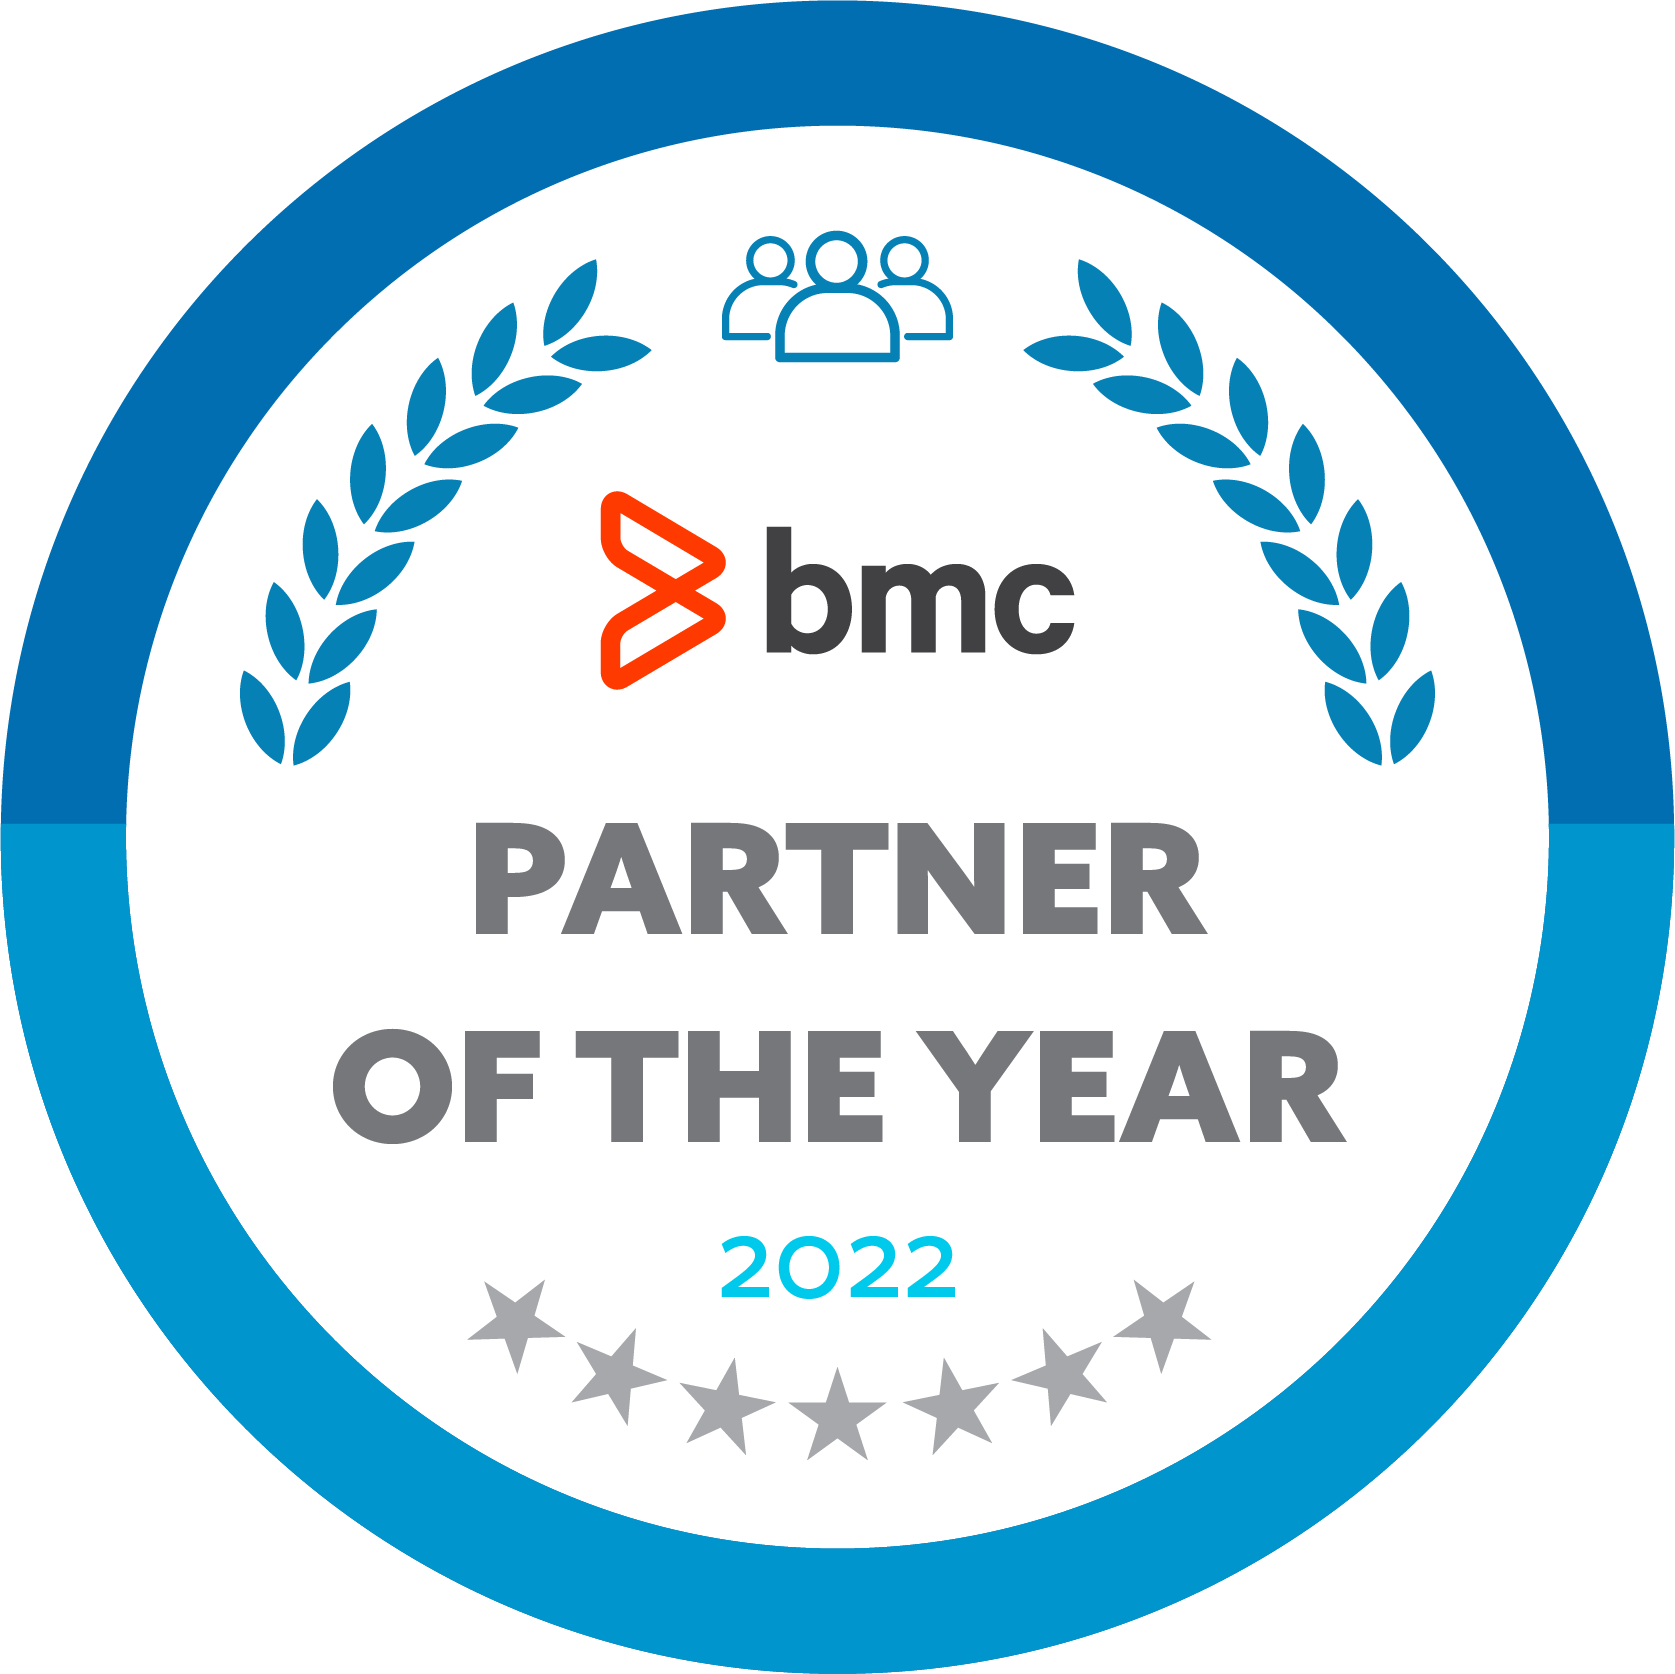 XTIVIA BMC IT Service Management<br />
Services, Software & Solutions for BMC Client Management, Discovery, Helix, Remedy ITSM, and Remedyforce partner of the year